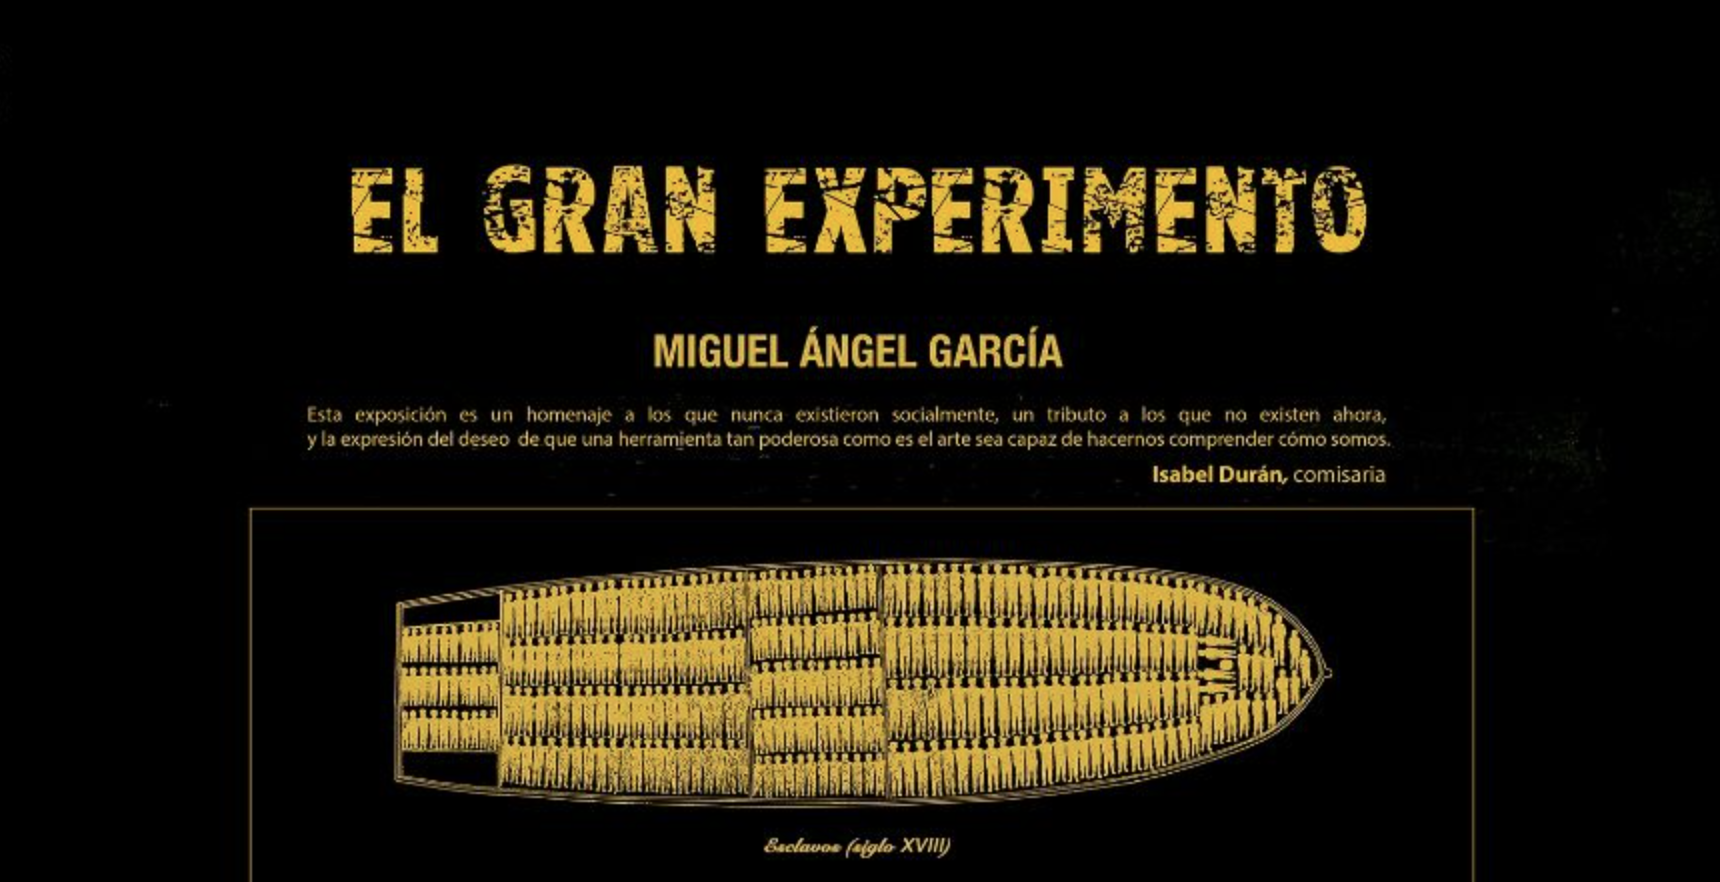 The exhibition " El gran experimento" by Miguel Angel García was inaugurated at the National Museum of Anthropology.